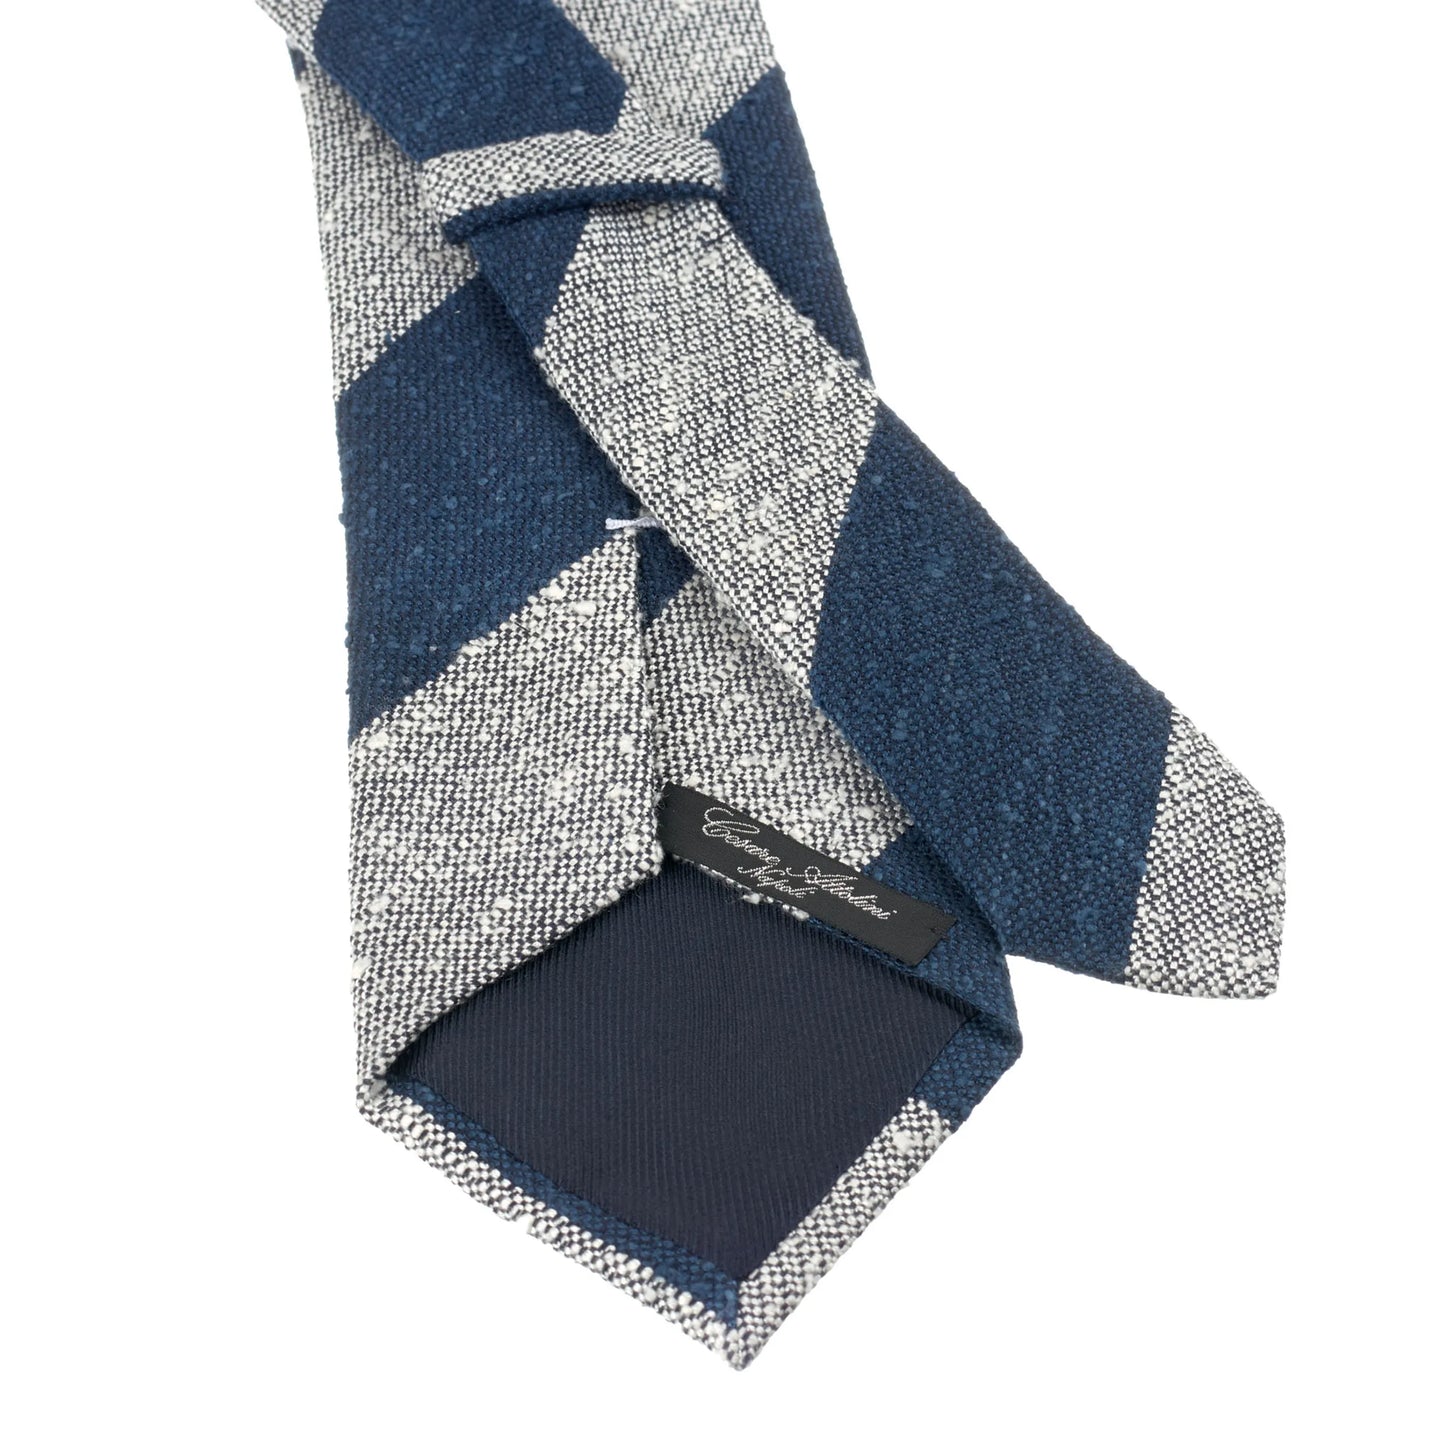 Regimental Textured Silk and Cotton-Blend Tie in Blue and White